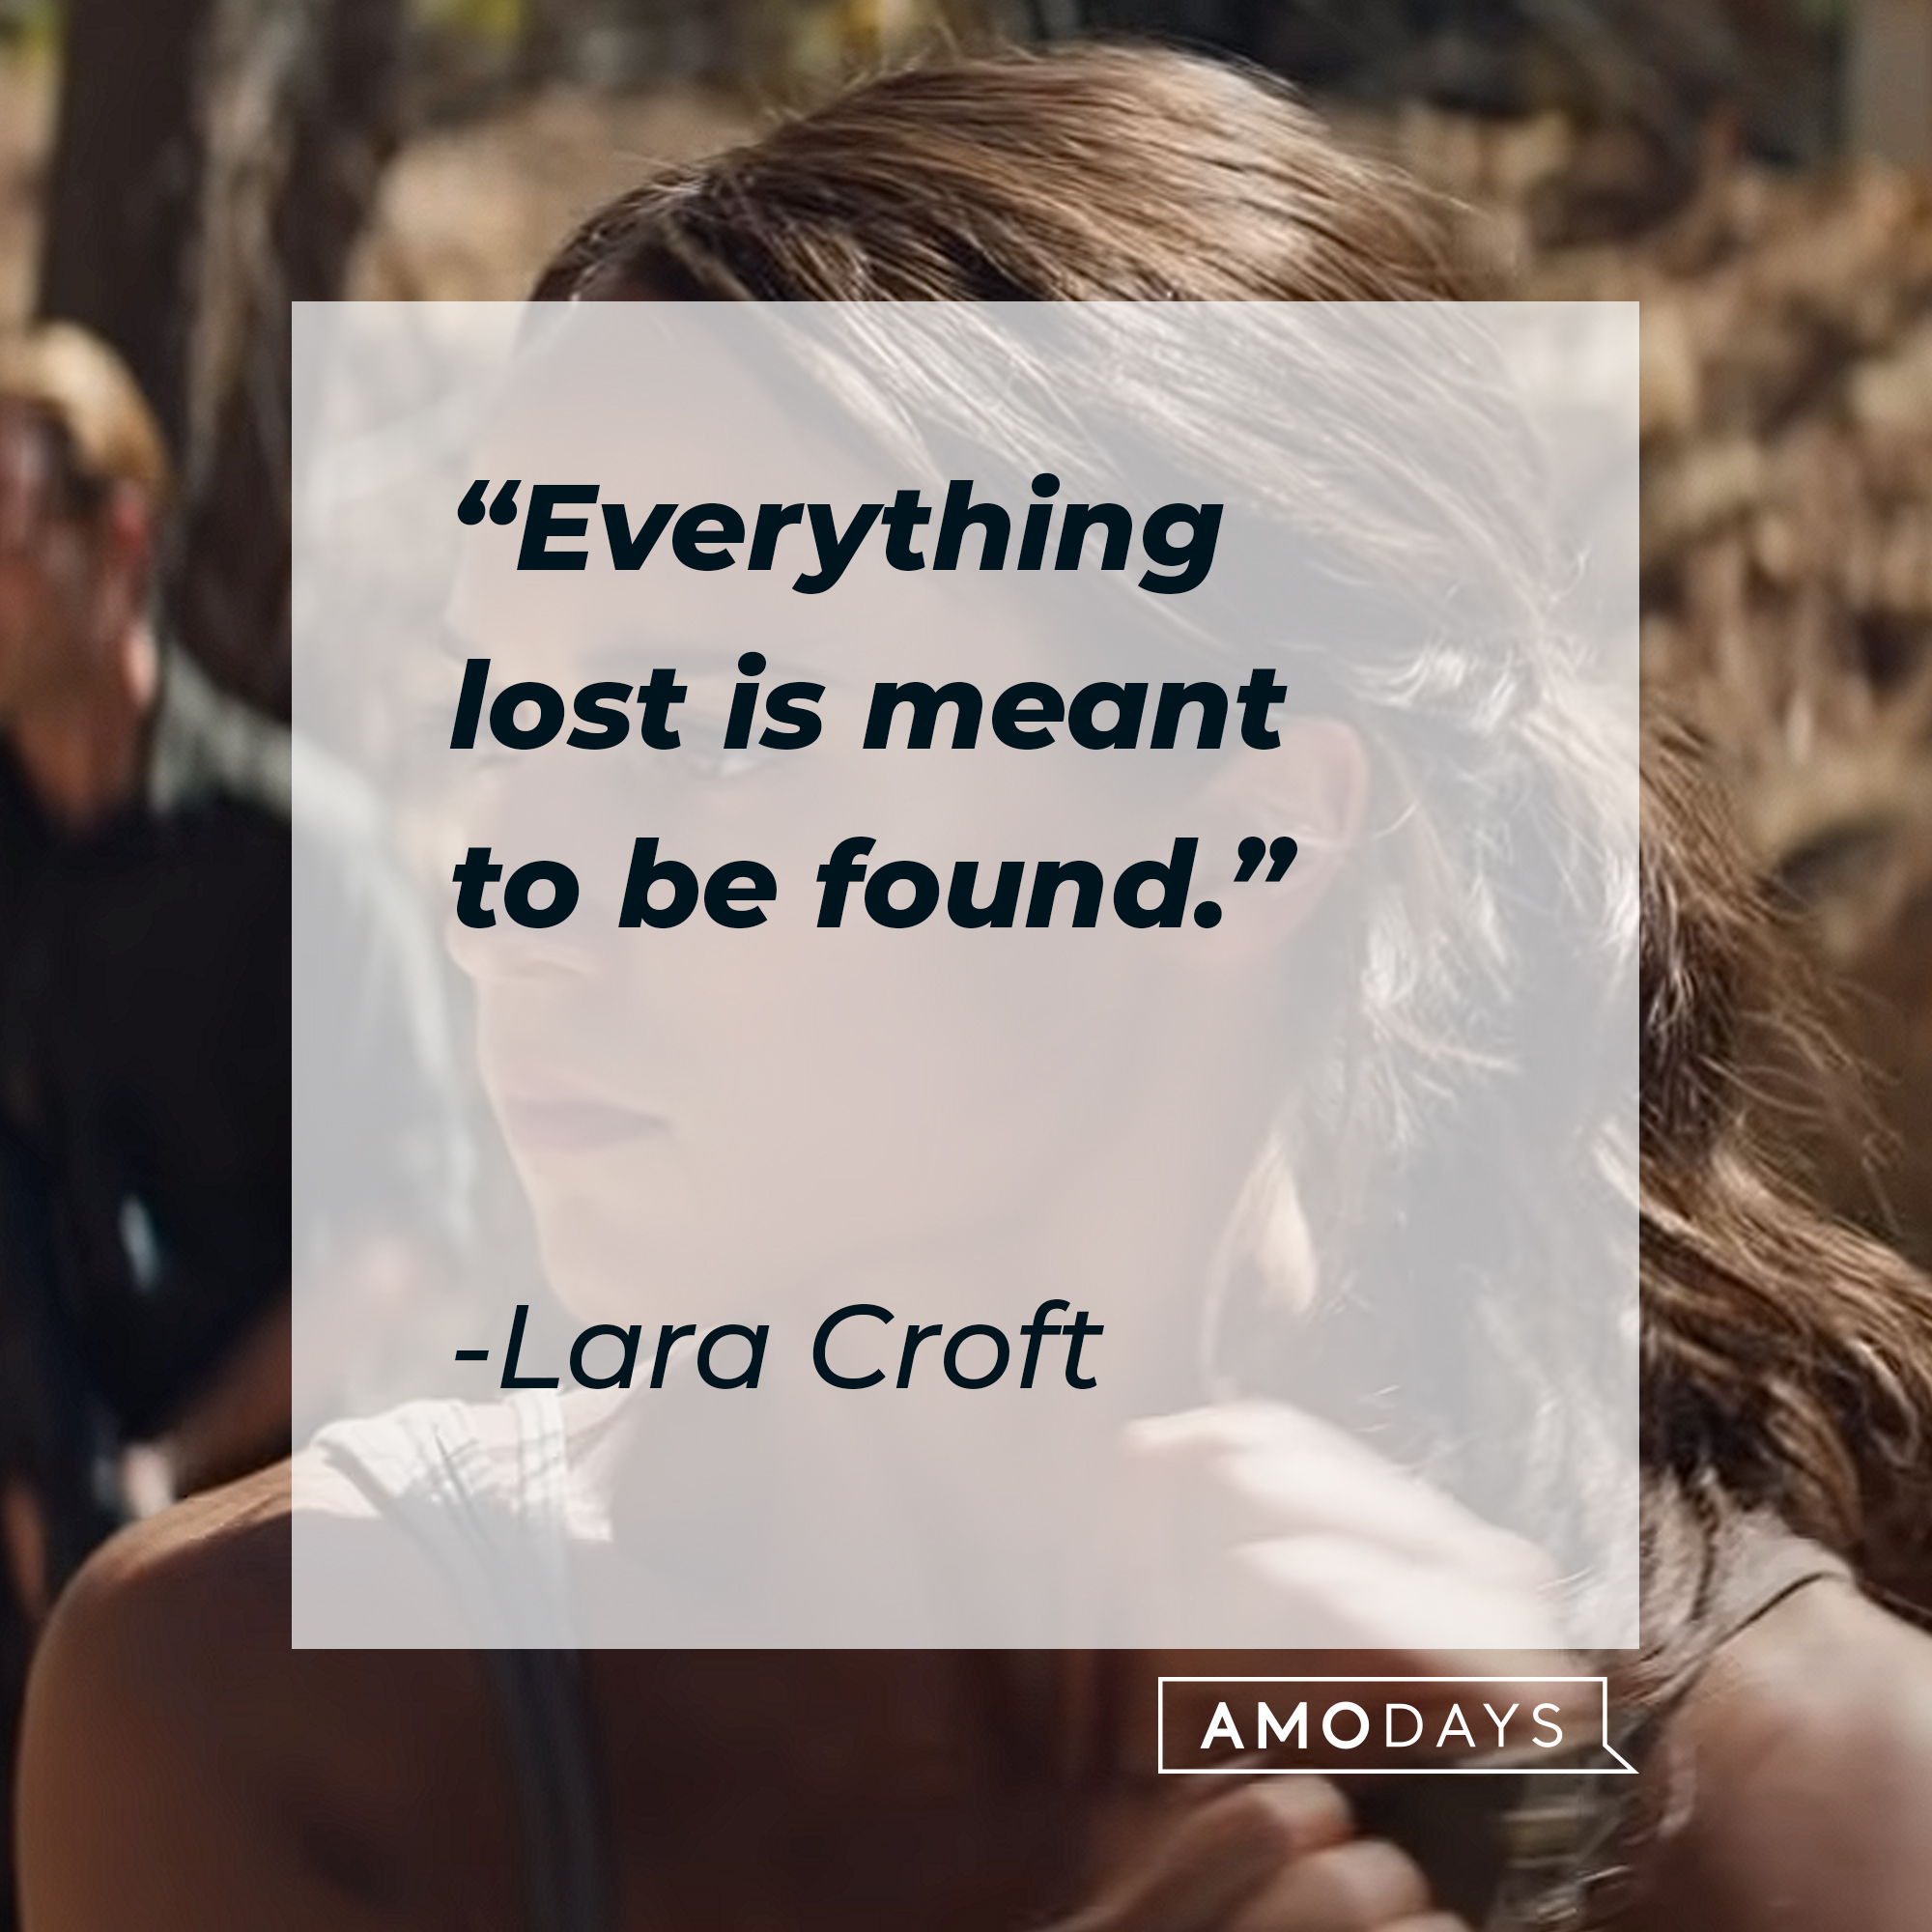 An image of Alicia Vikander’s Lara Croft with a Lara Croft  quote: “Everything lost is meant to be found.” | Source: youtube.com/WarnerBrosPictures